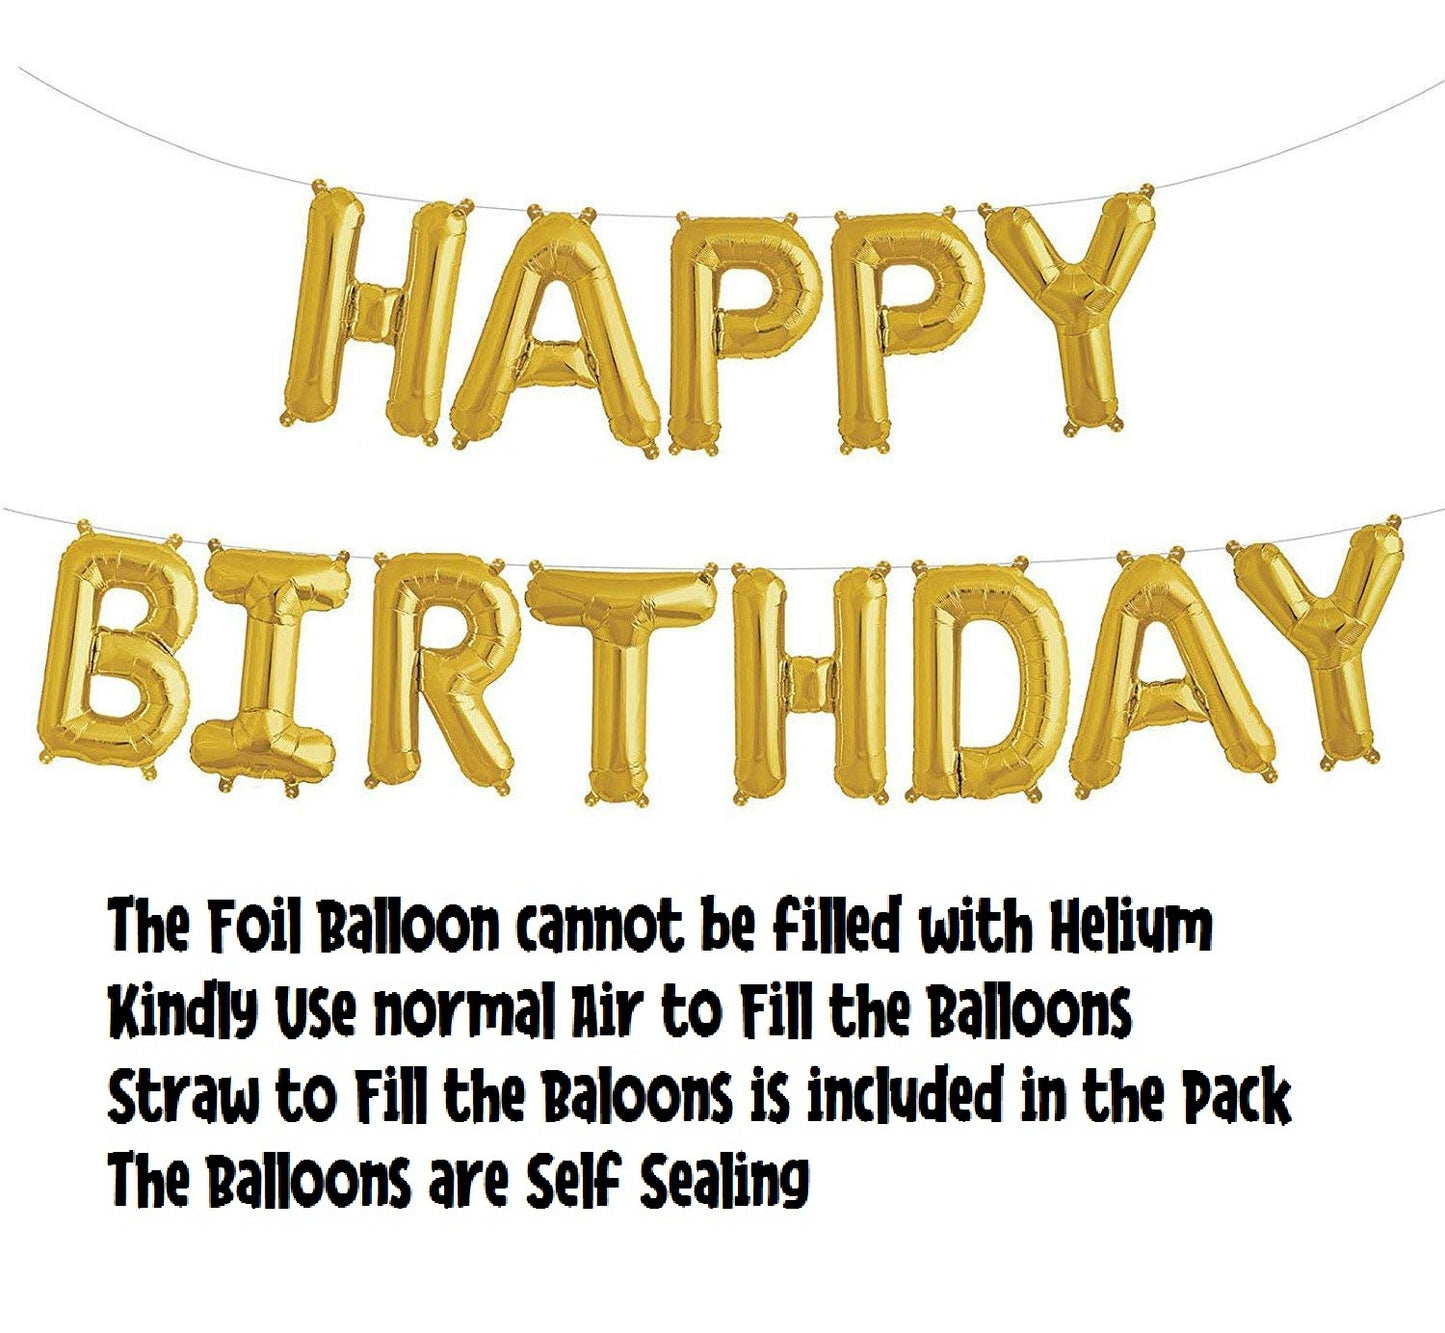 Happy 34th Birthday Foil Balloon Combo Party Decoration for Anniversary Celebration 16 Inches